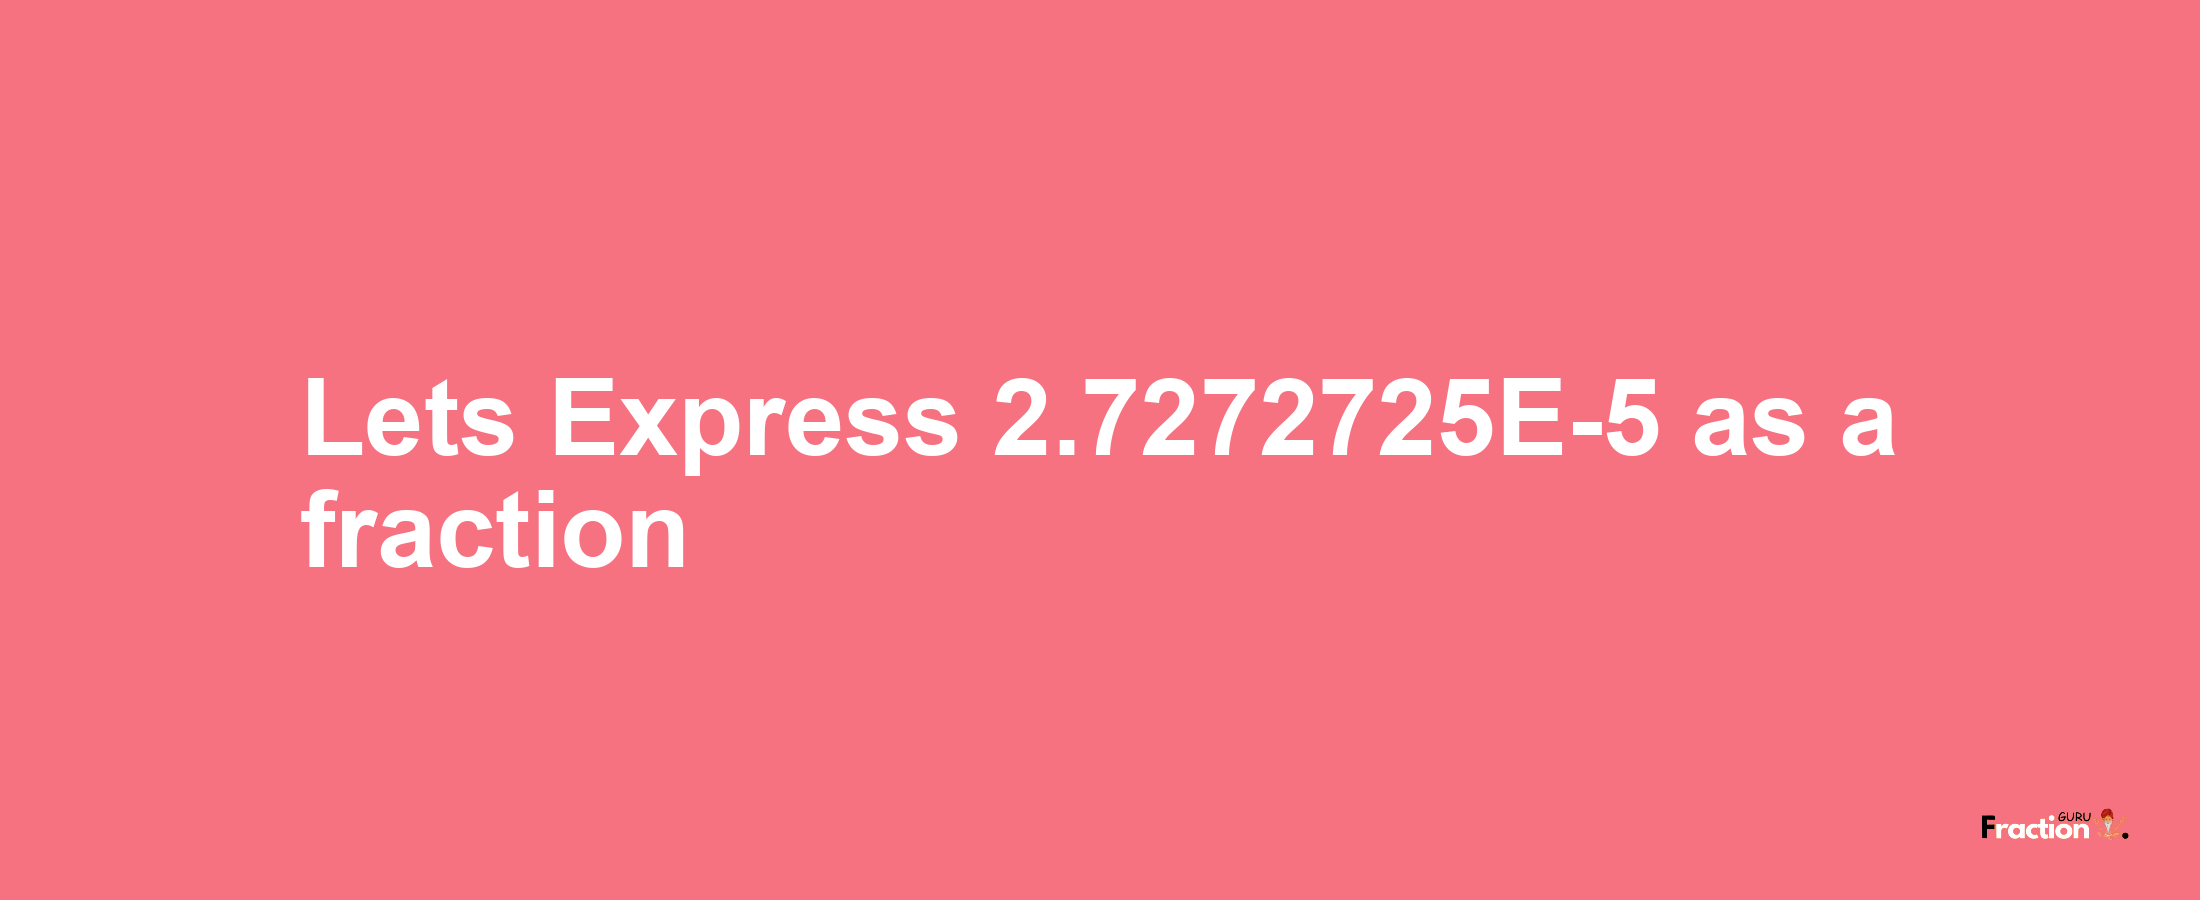 Lets Express 2.7272725E-5 as afraction